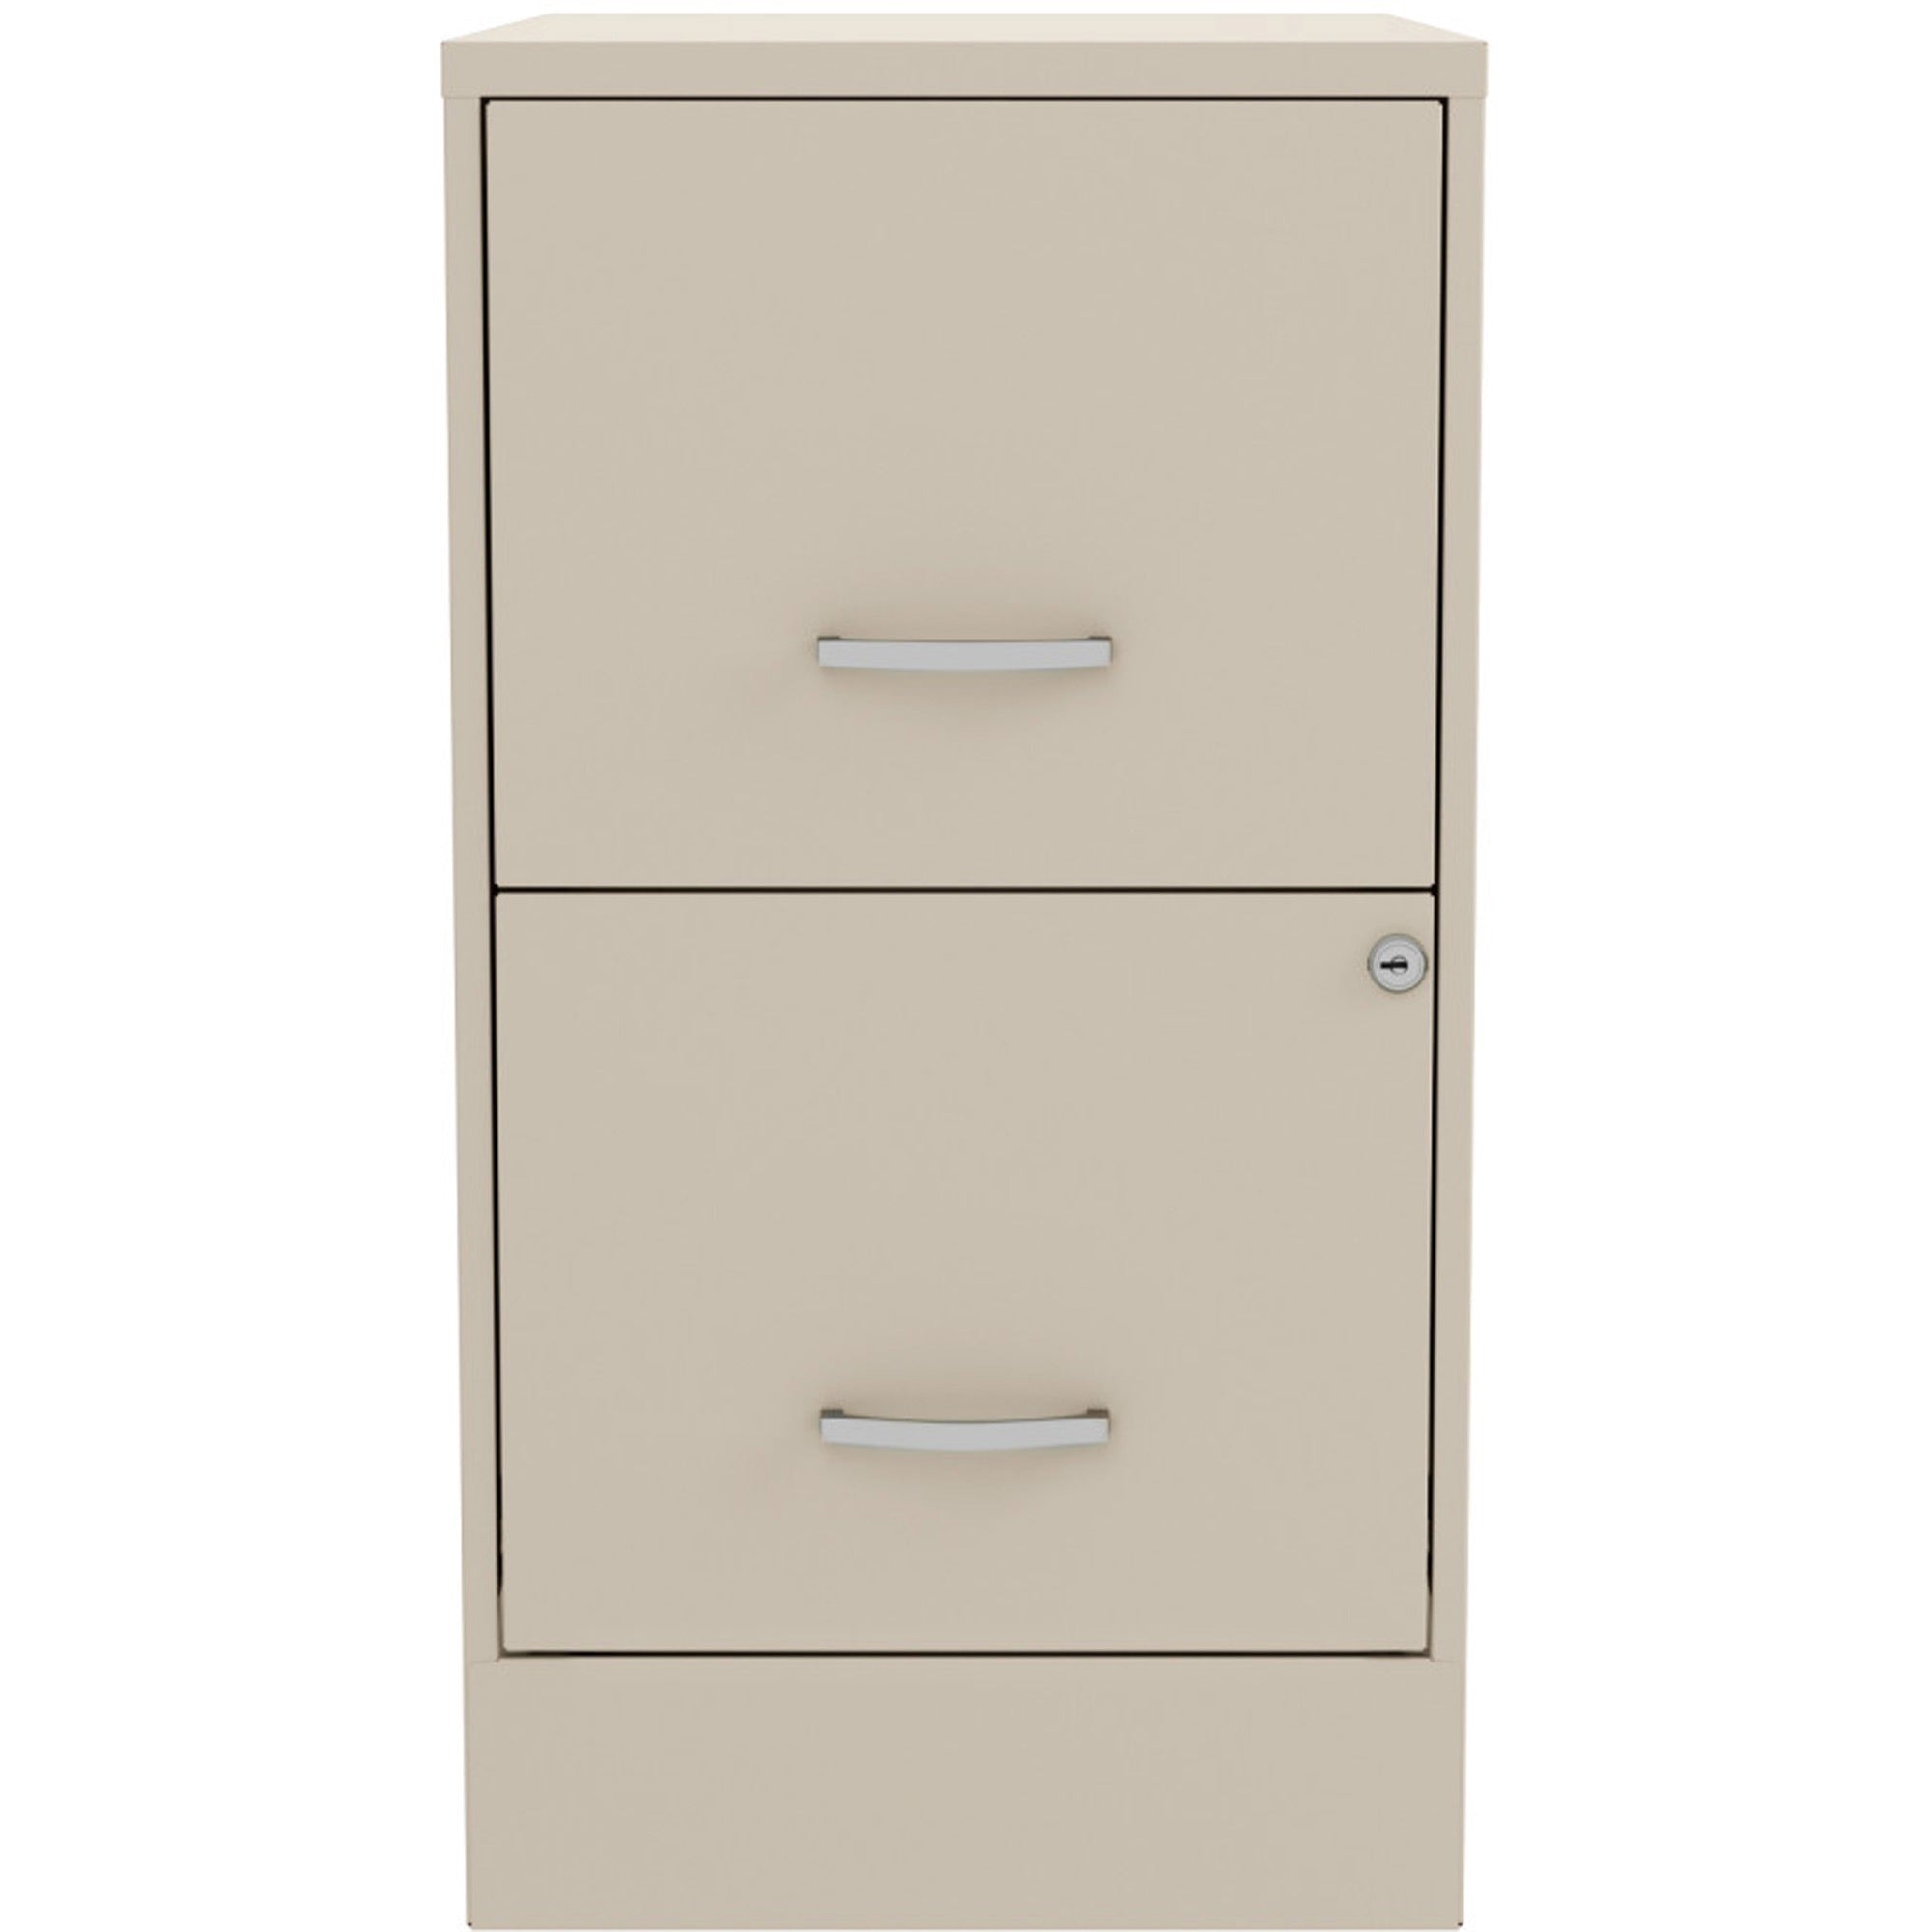 nusparc-file-cabinet-142-x-22-x-266-2-x-drawers-for-file-letter-mobility-locking-drawer-glide-suspension-3-4-drawer-extension-cam-lock-nonporous-surface-stone-steel-painted-steel-recycled_nprvf222aase - 2